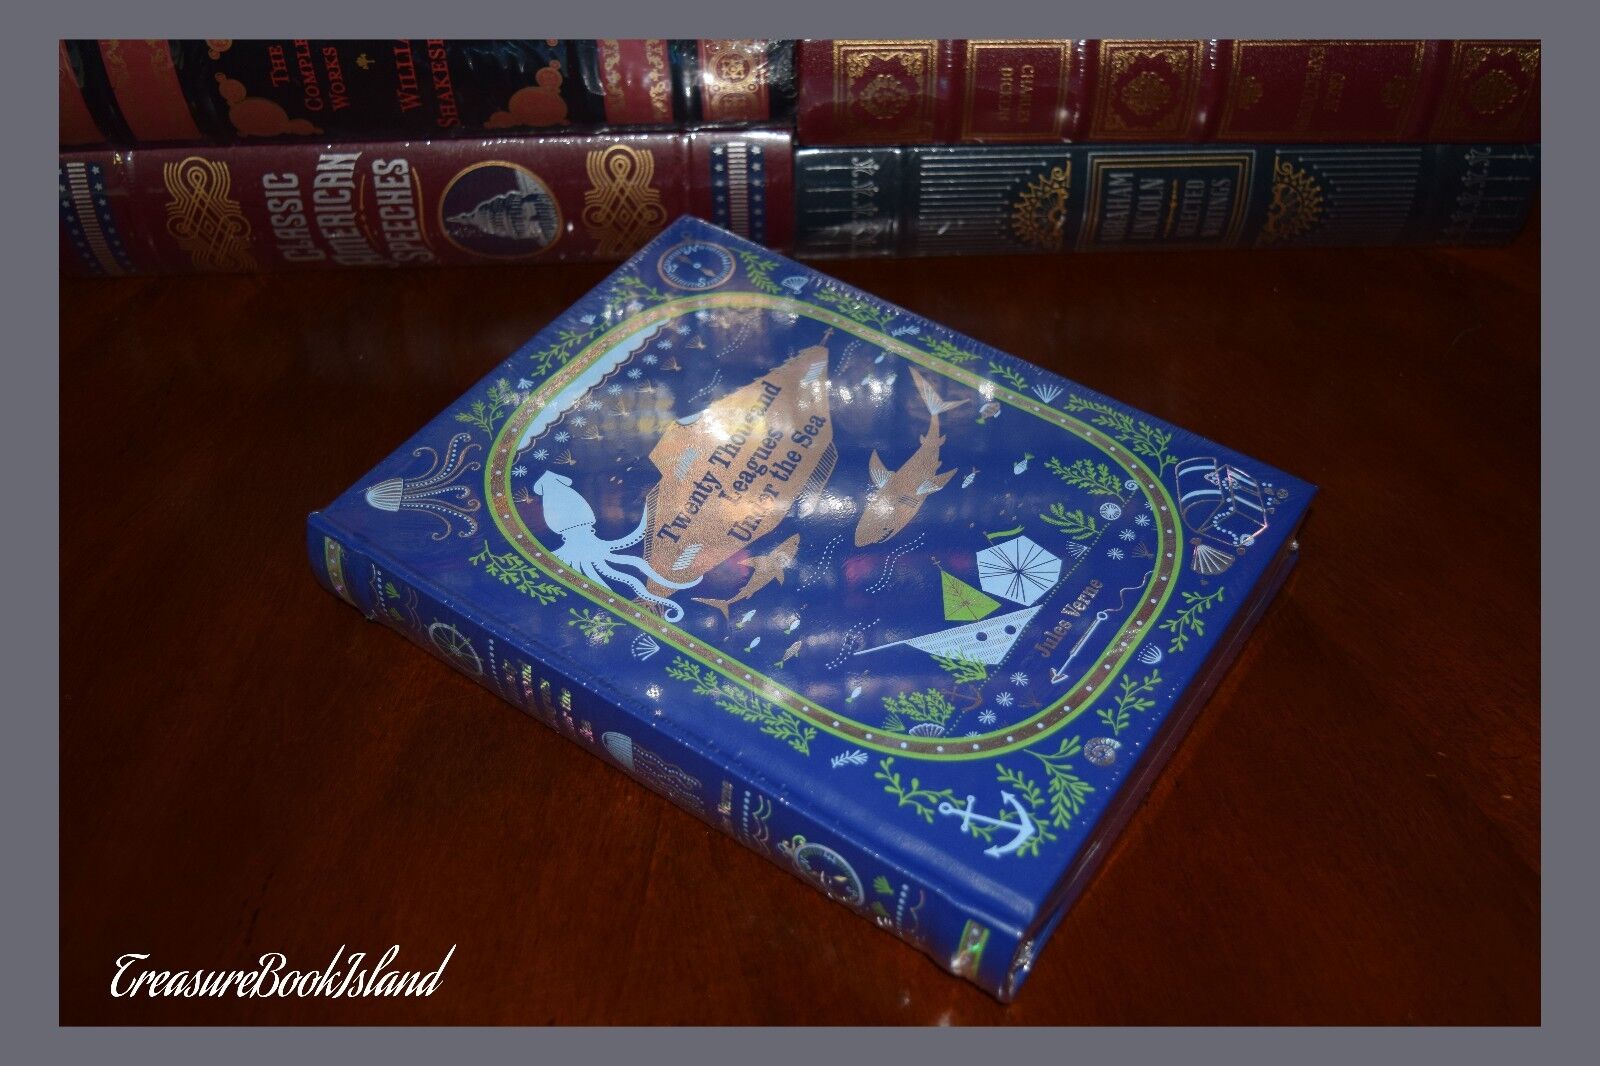 Twenty Thousand Leagues Under the Sea by Jules Verne New Sealed Leather Bound Ed Без бренда - фотография #5